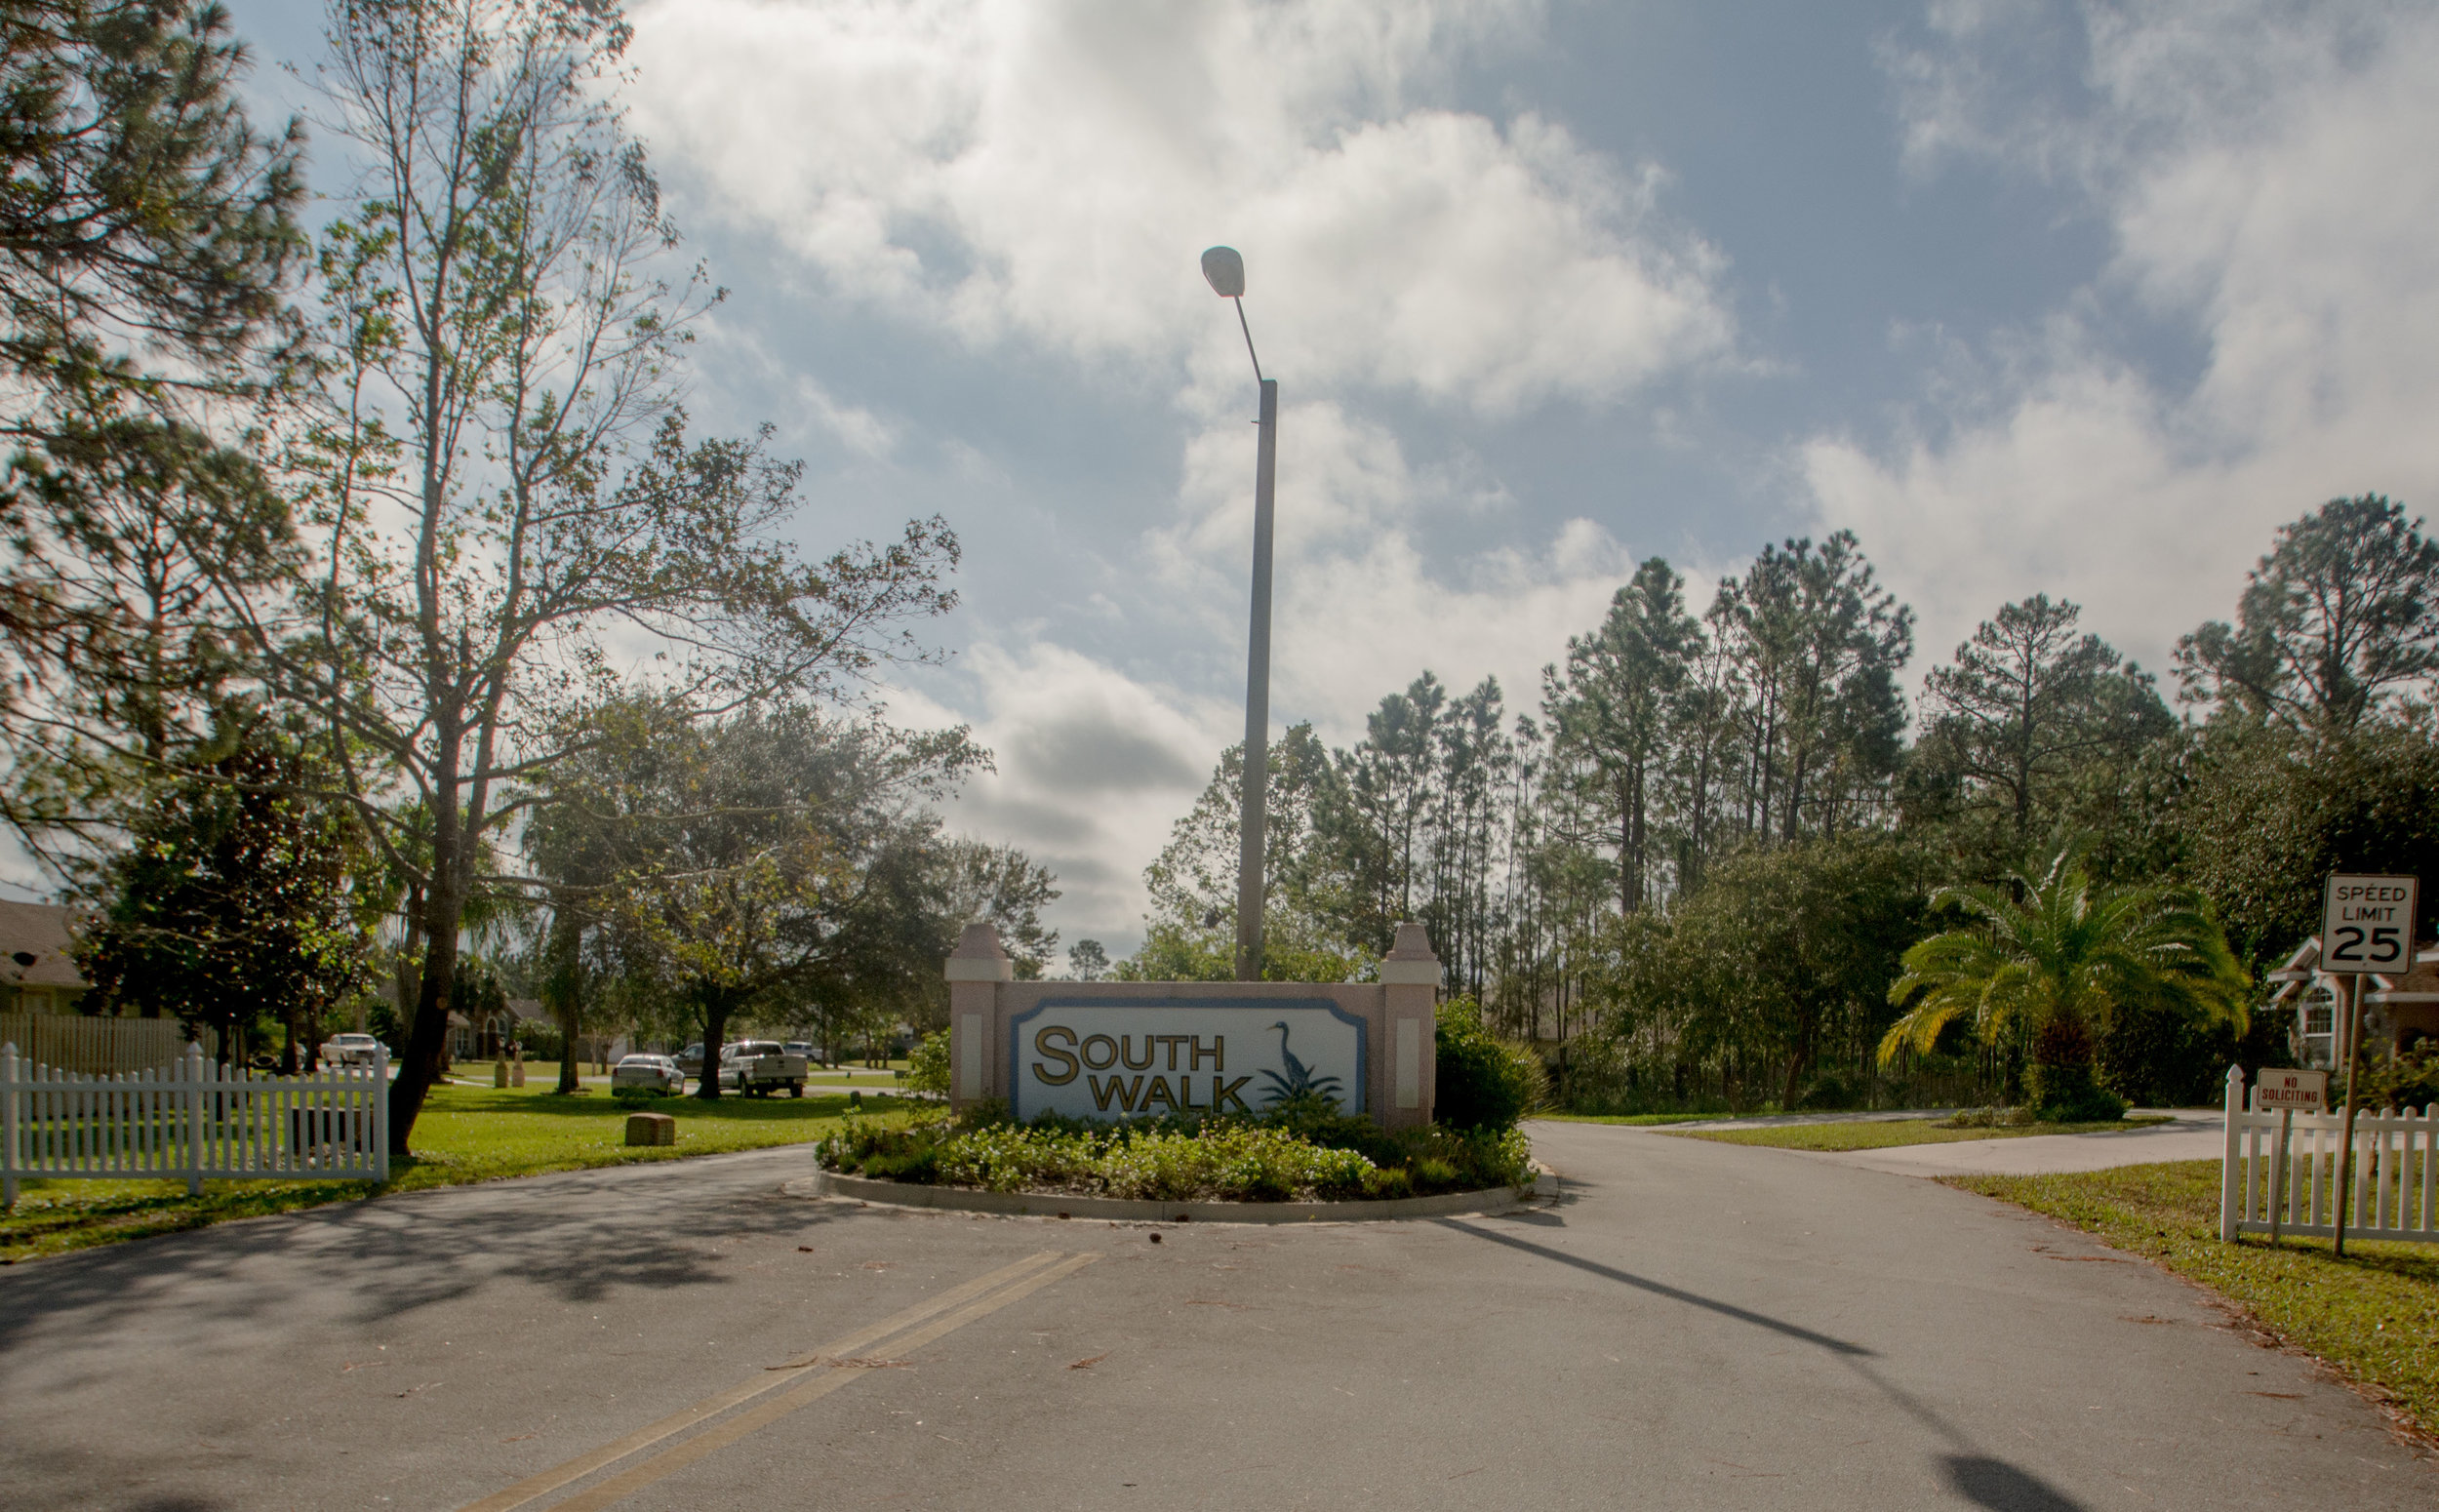  Residential subdivisions, a common occurance in Central Florida, often choose ironic names.&nbsp; South Walk , for instance,&nbsp;lacks sidewalks or other features that promote walking. 